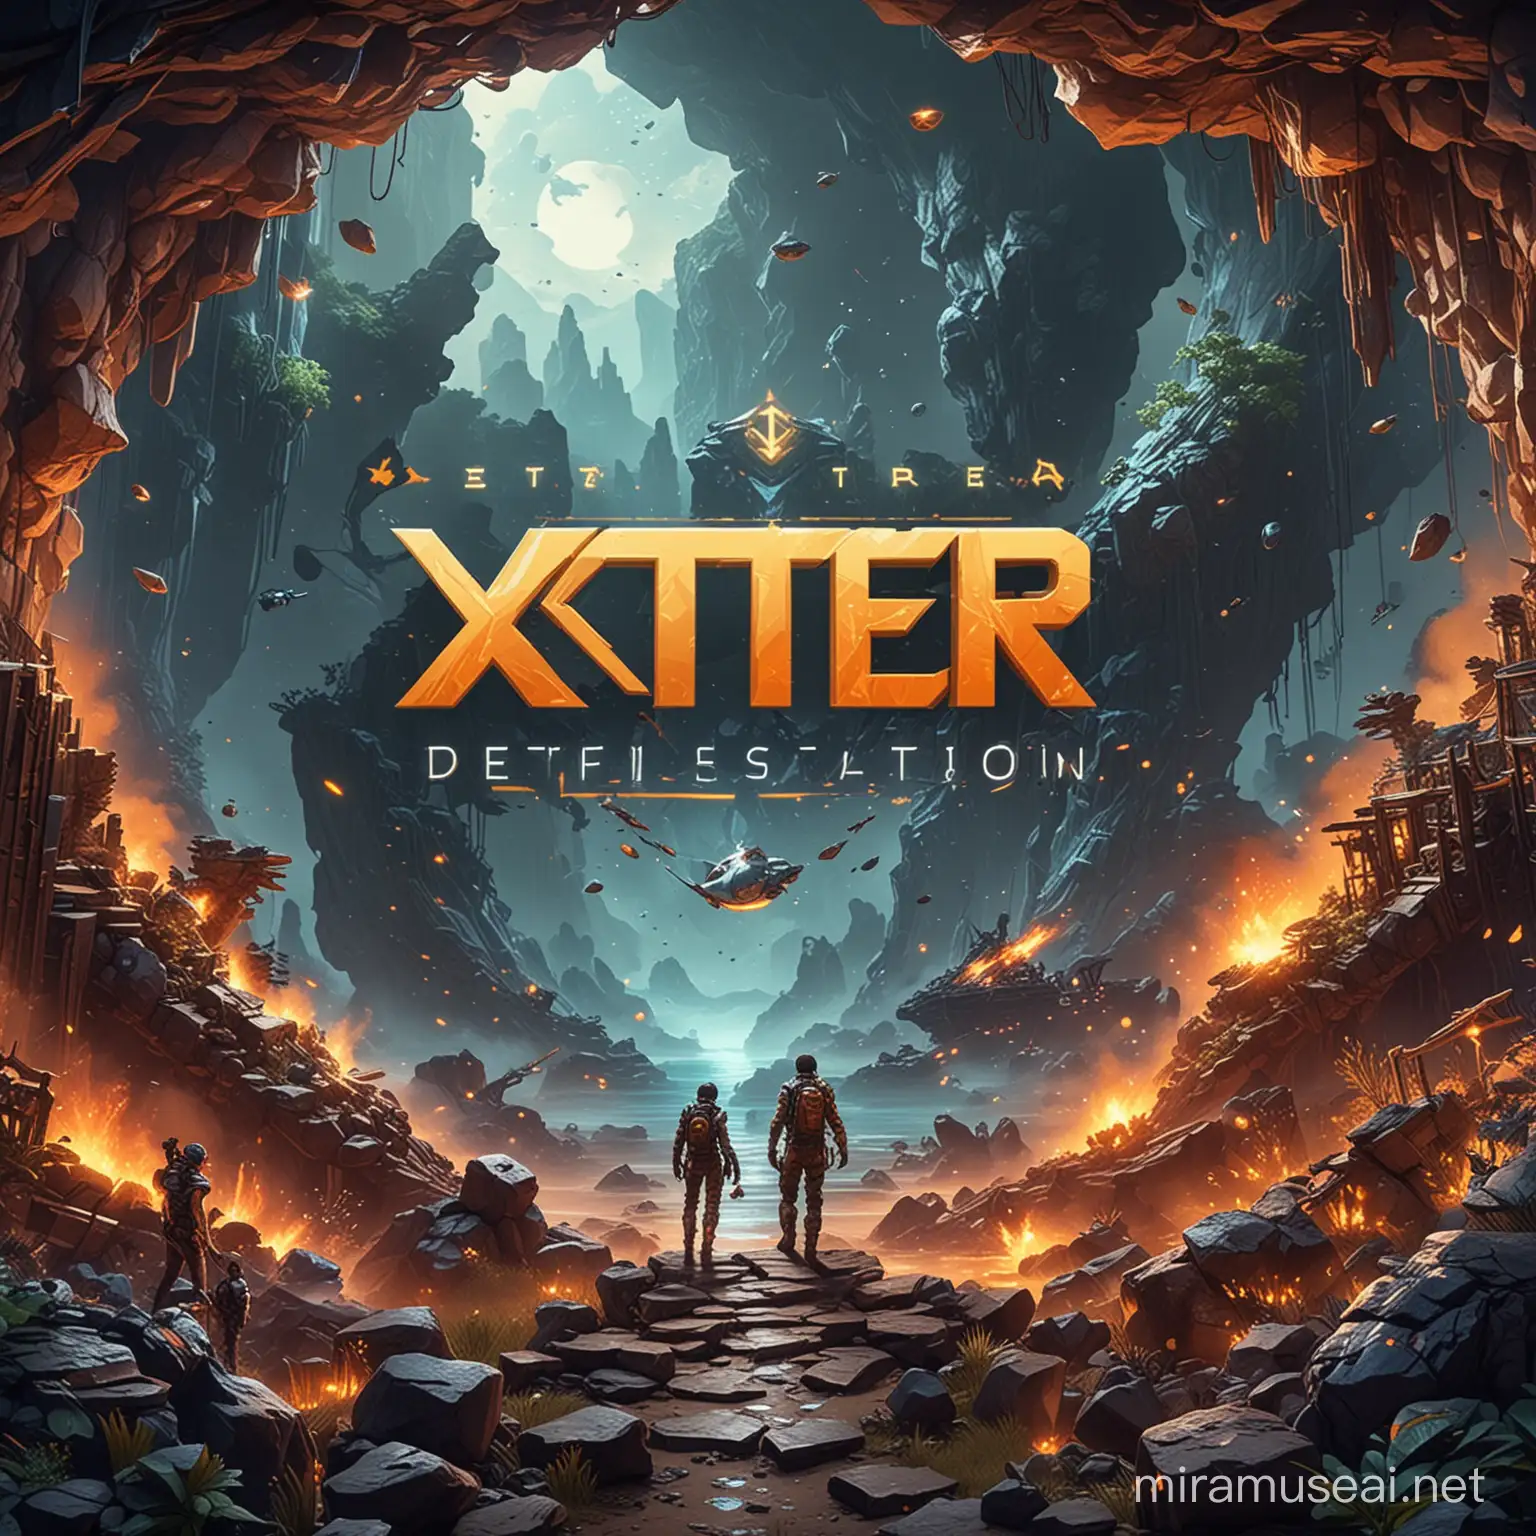 Ignite your passion for detailed exploration with $Xter and @Xteriogames. Dive into the intricacies of decentralized system